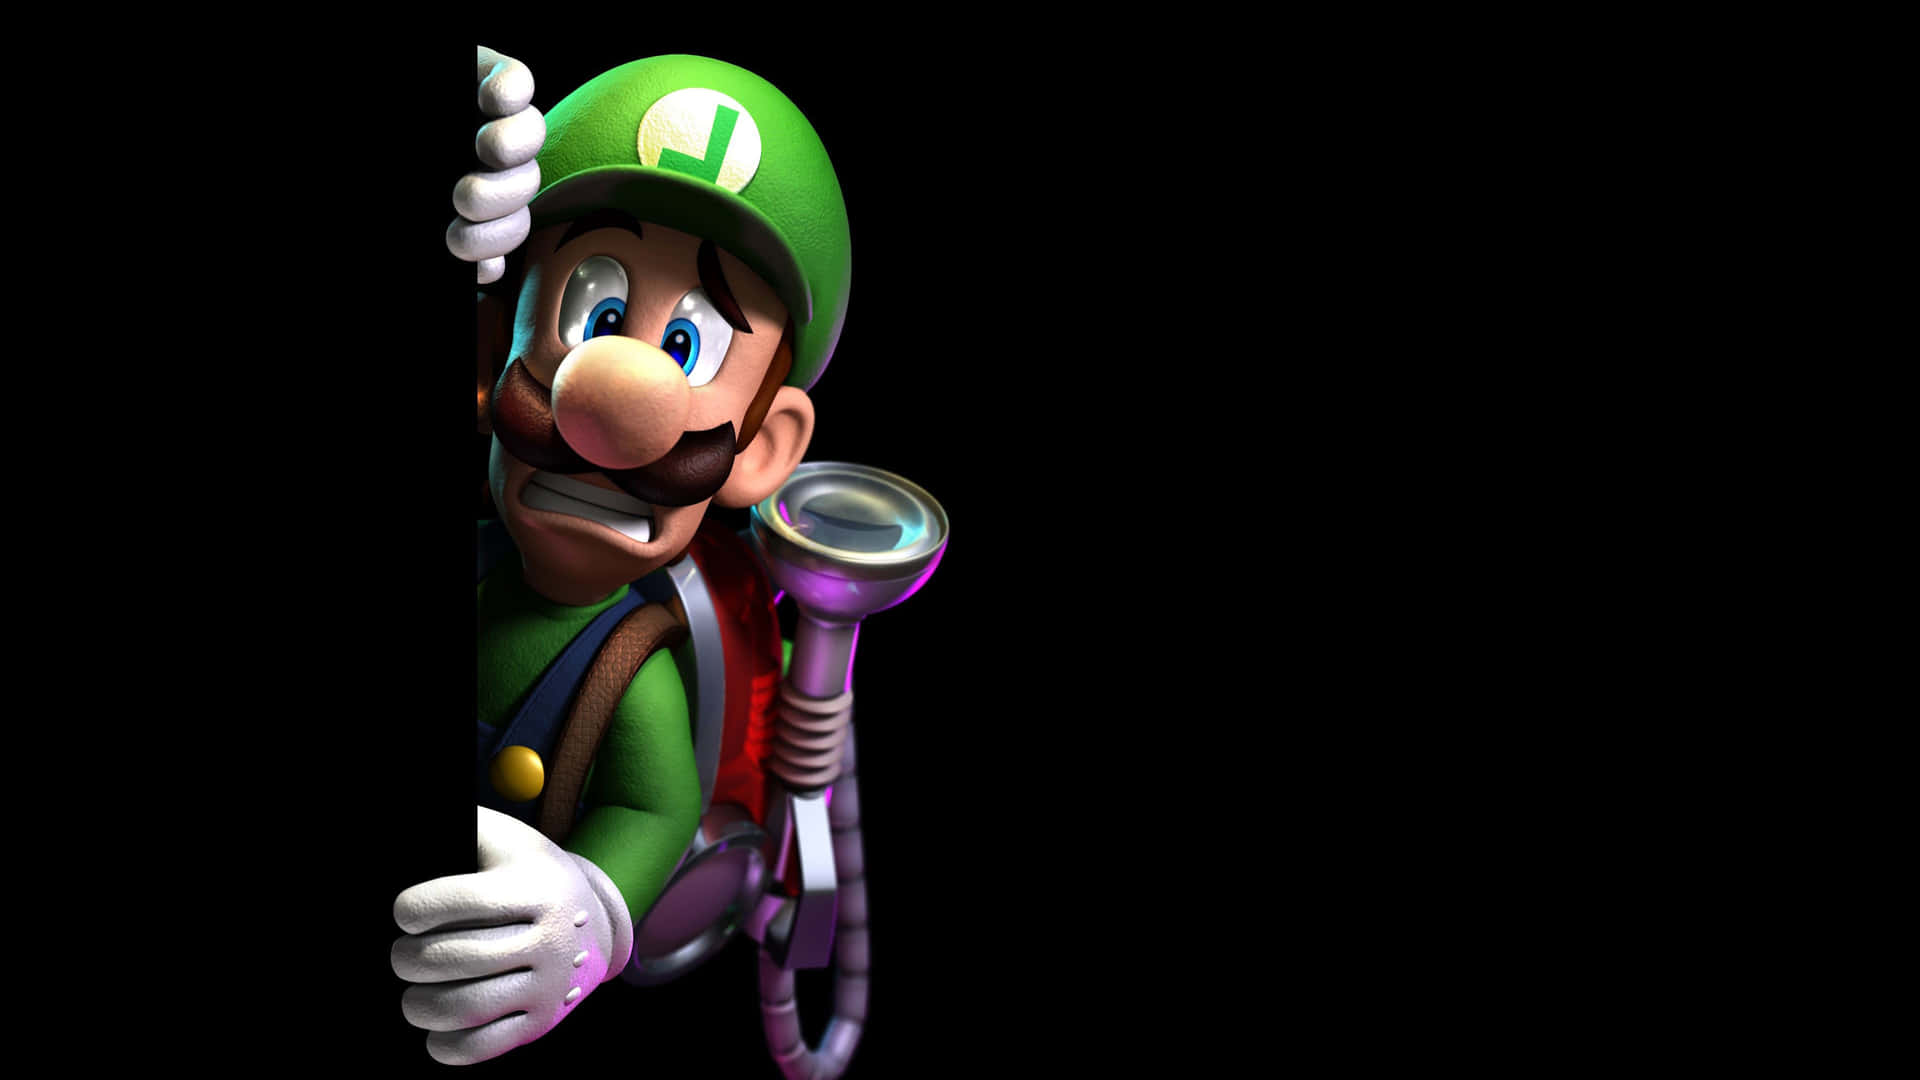 The Iconic Cool Mario Video Game Character Wallpaper